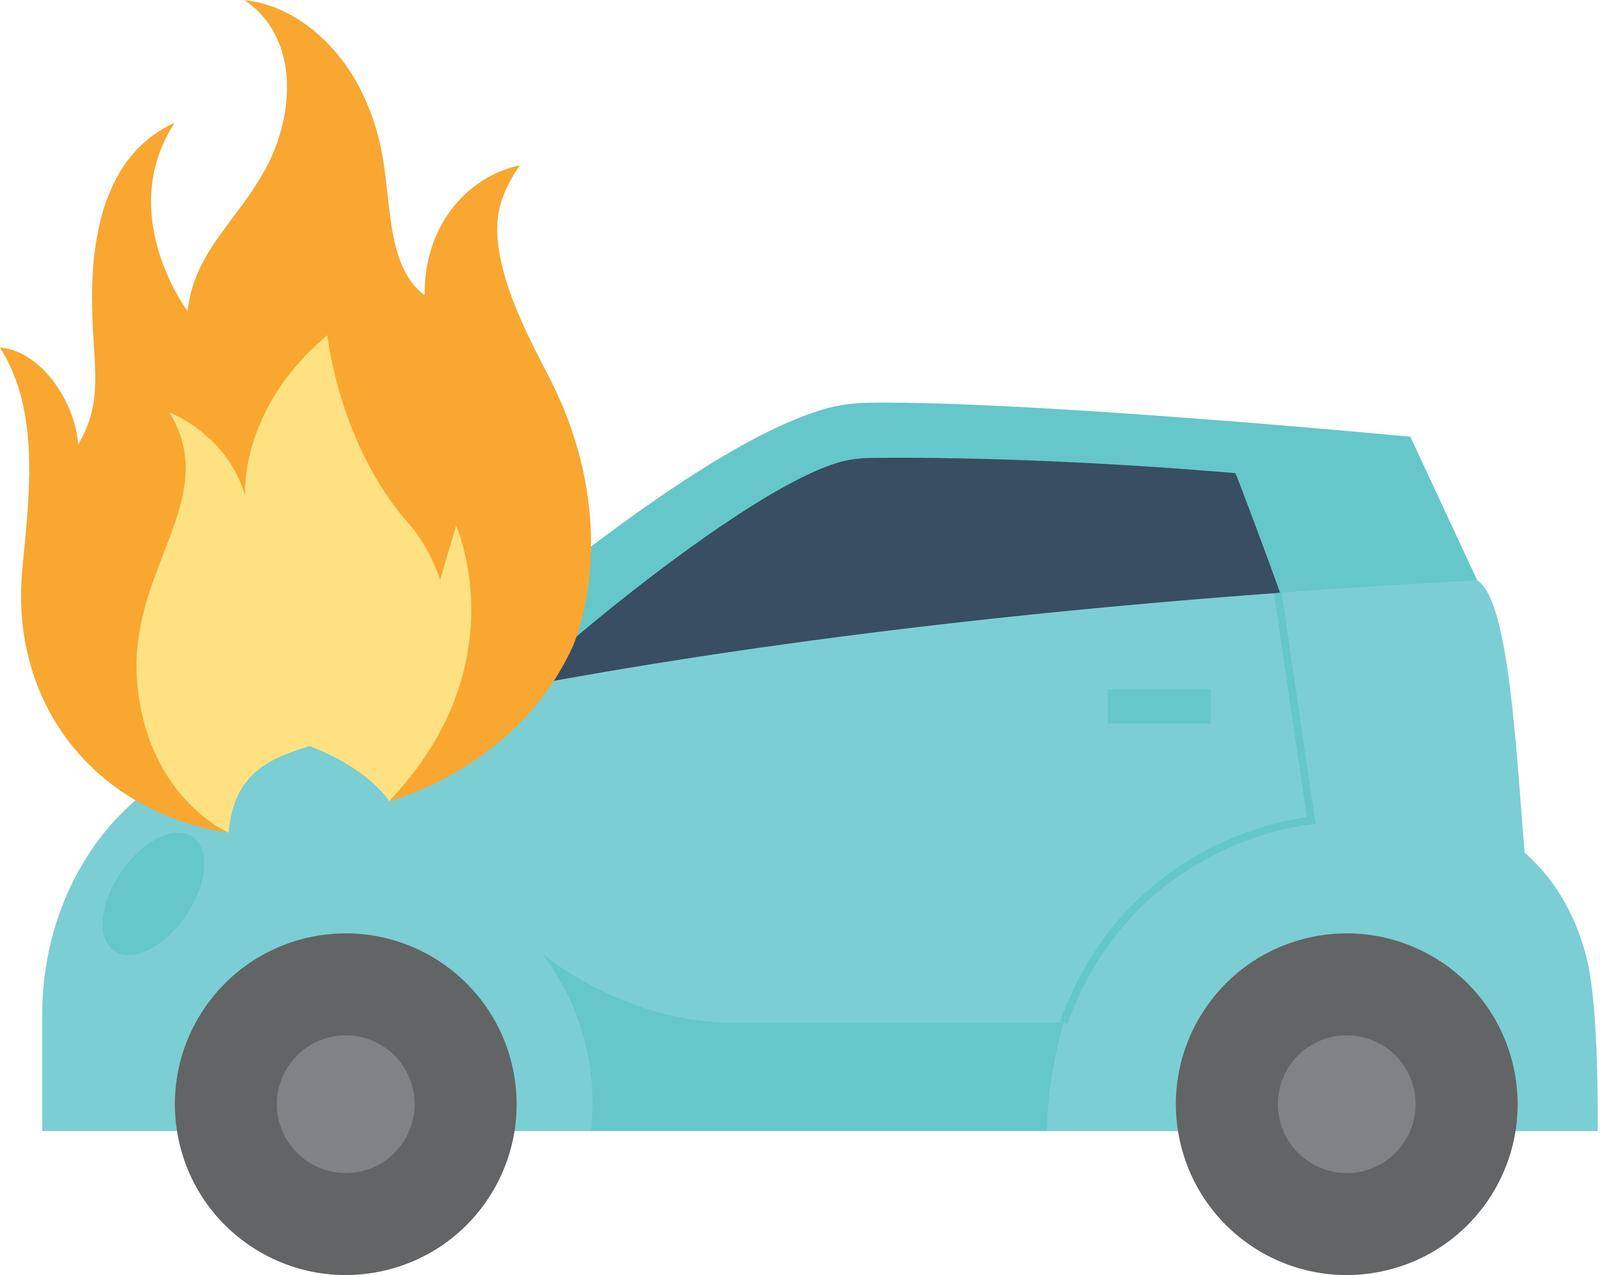 Car on fire icon in flat color style. Automotive transportation accident accident burned insurance claim